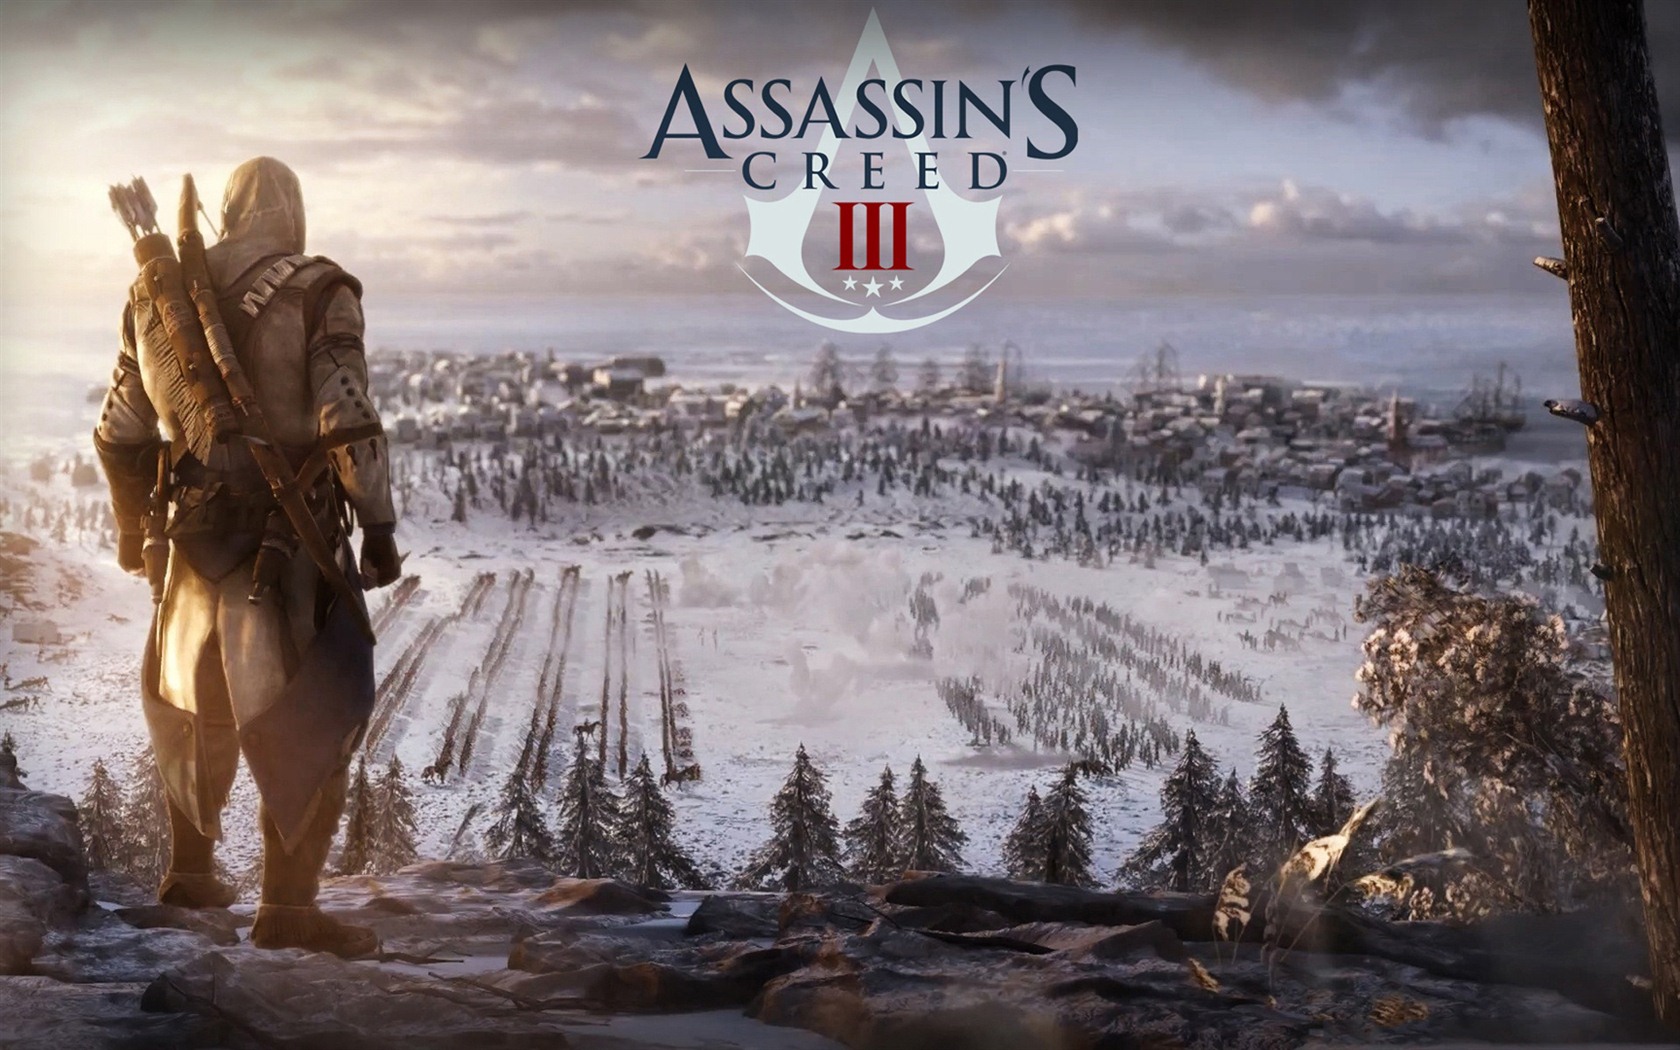 Assassin's Creed 3 HD wallpapers #17 - 1680x1050